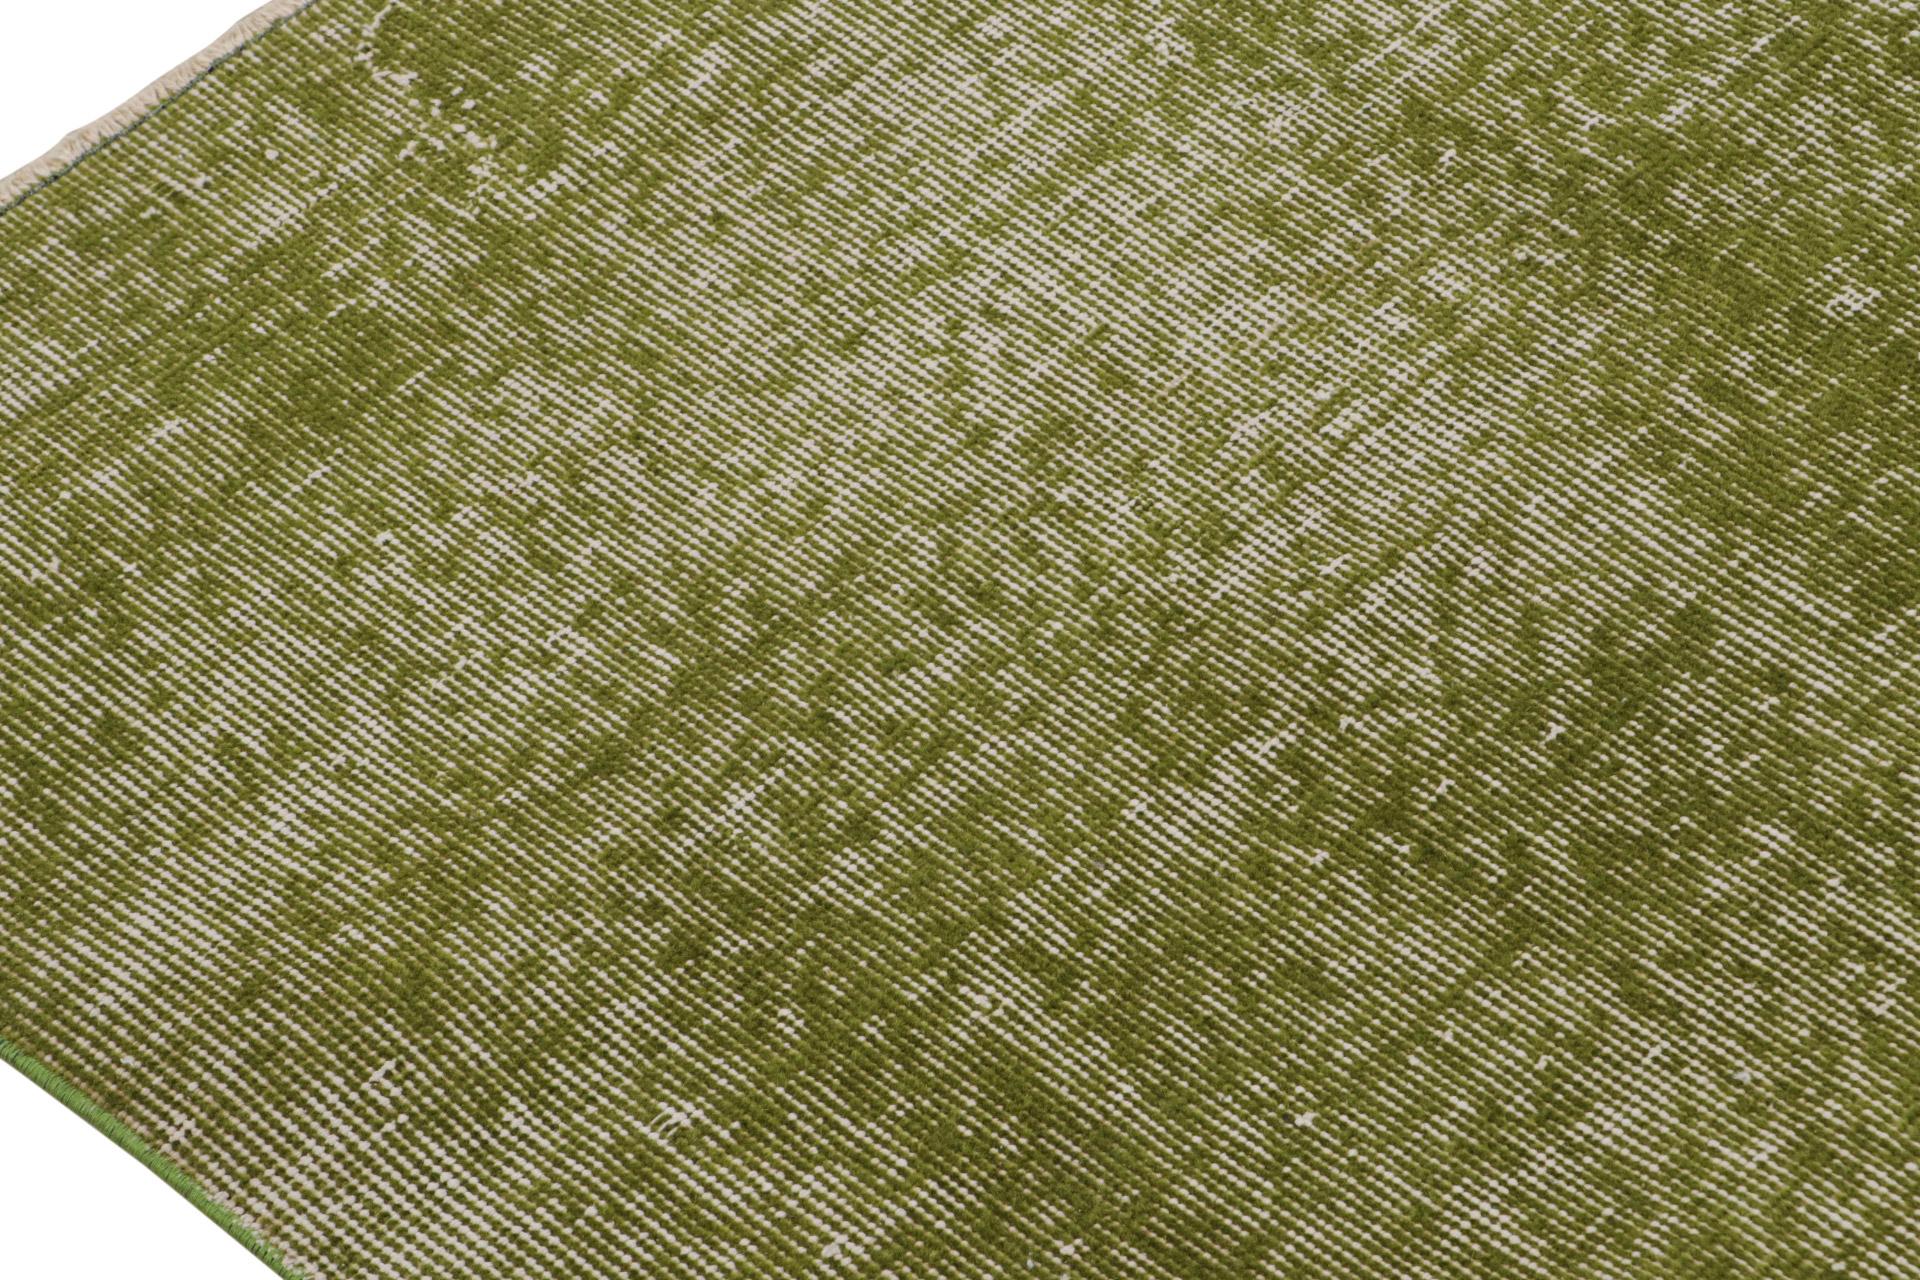 Vintage Zeki Müren Solid Rug, in Chartreuse Green, from Rug & Kilim In Good Condition For Sale In Long Island City, NY